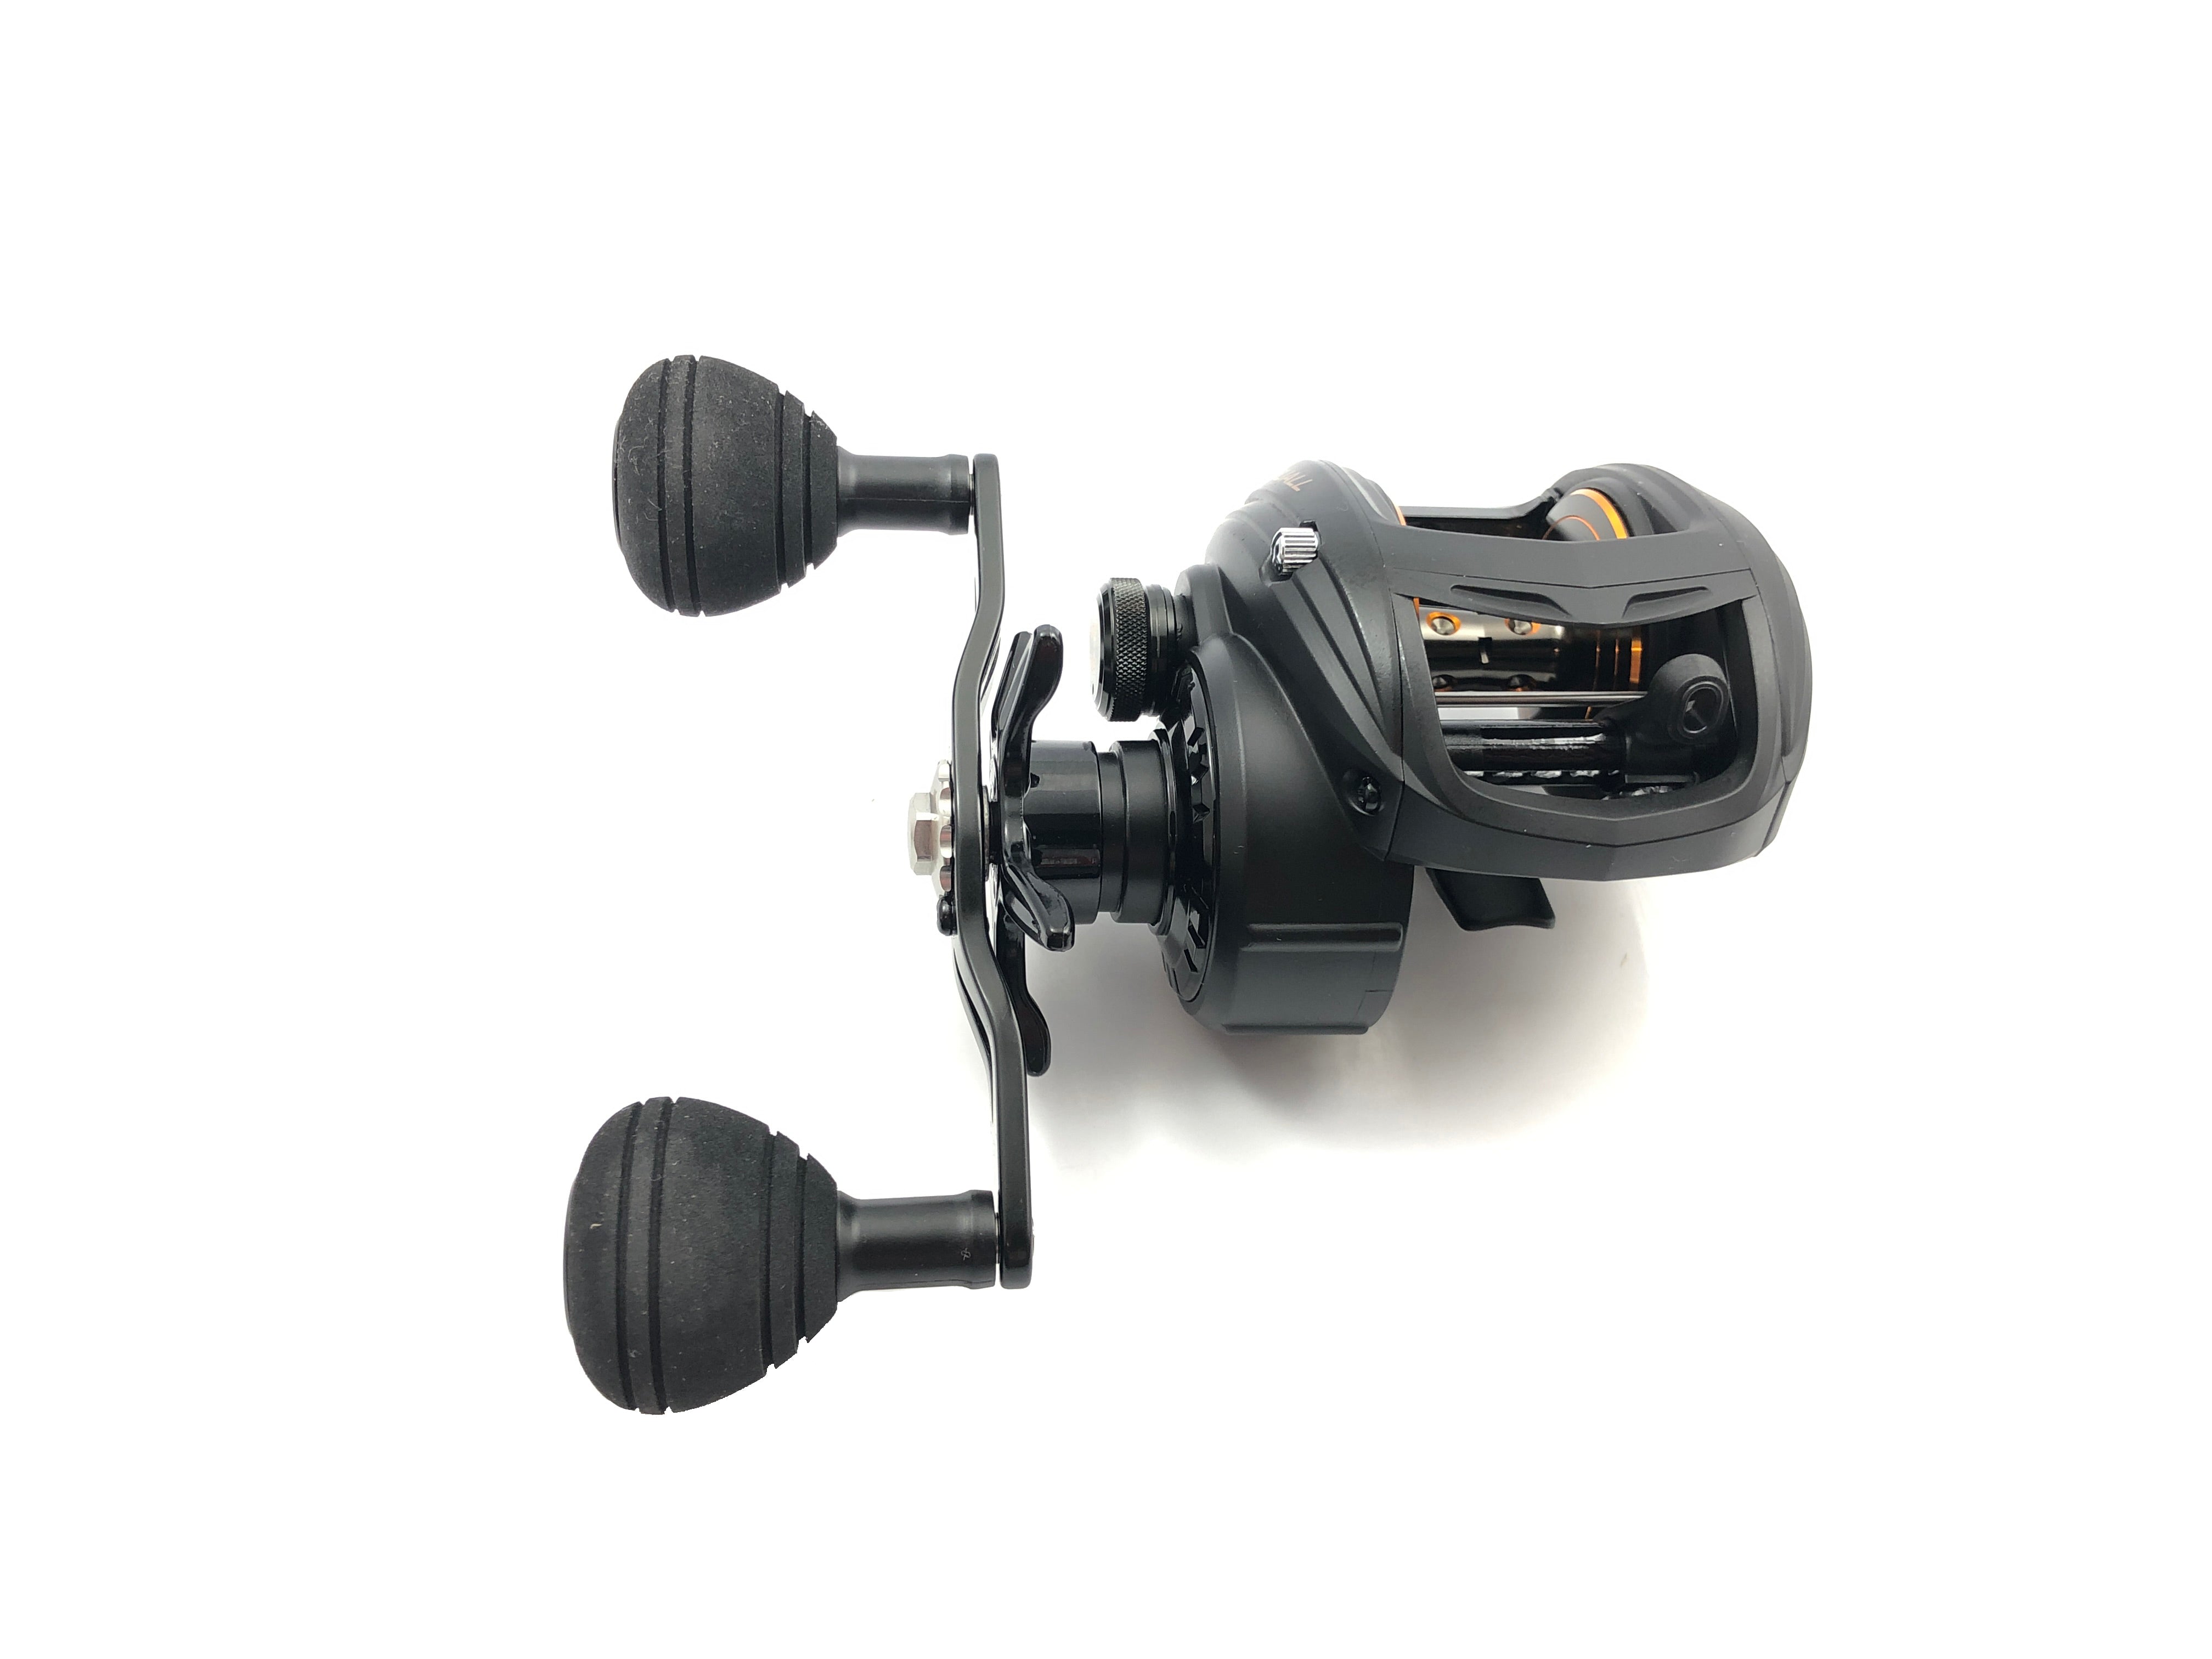 Penn Squall High Speed Low Profile Reel - Capt. Harry's Fishing Supply